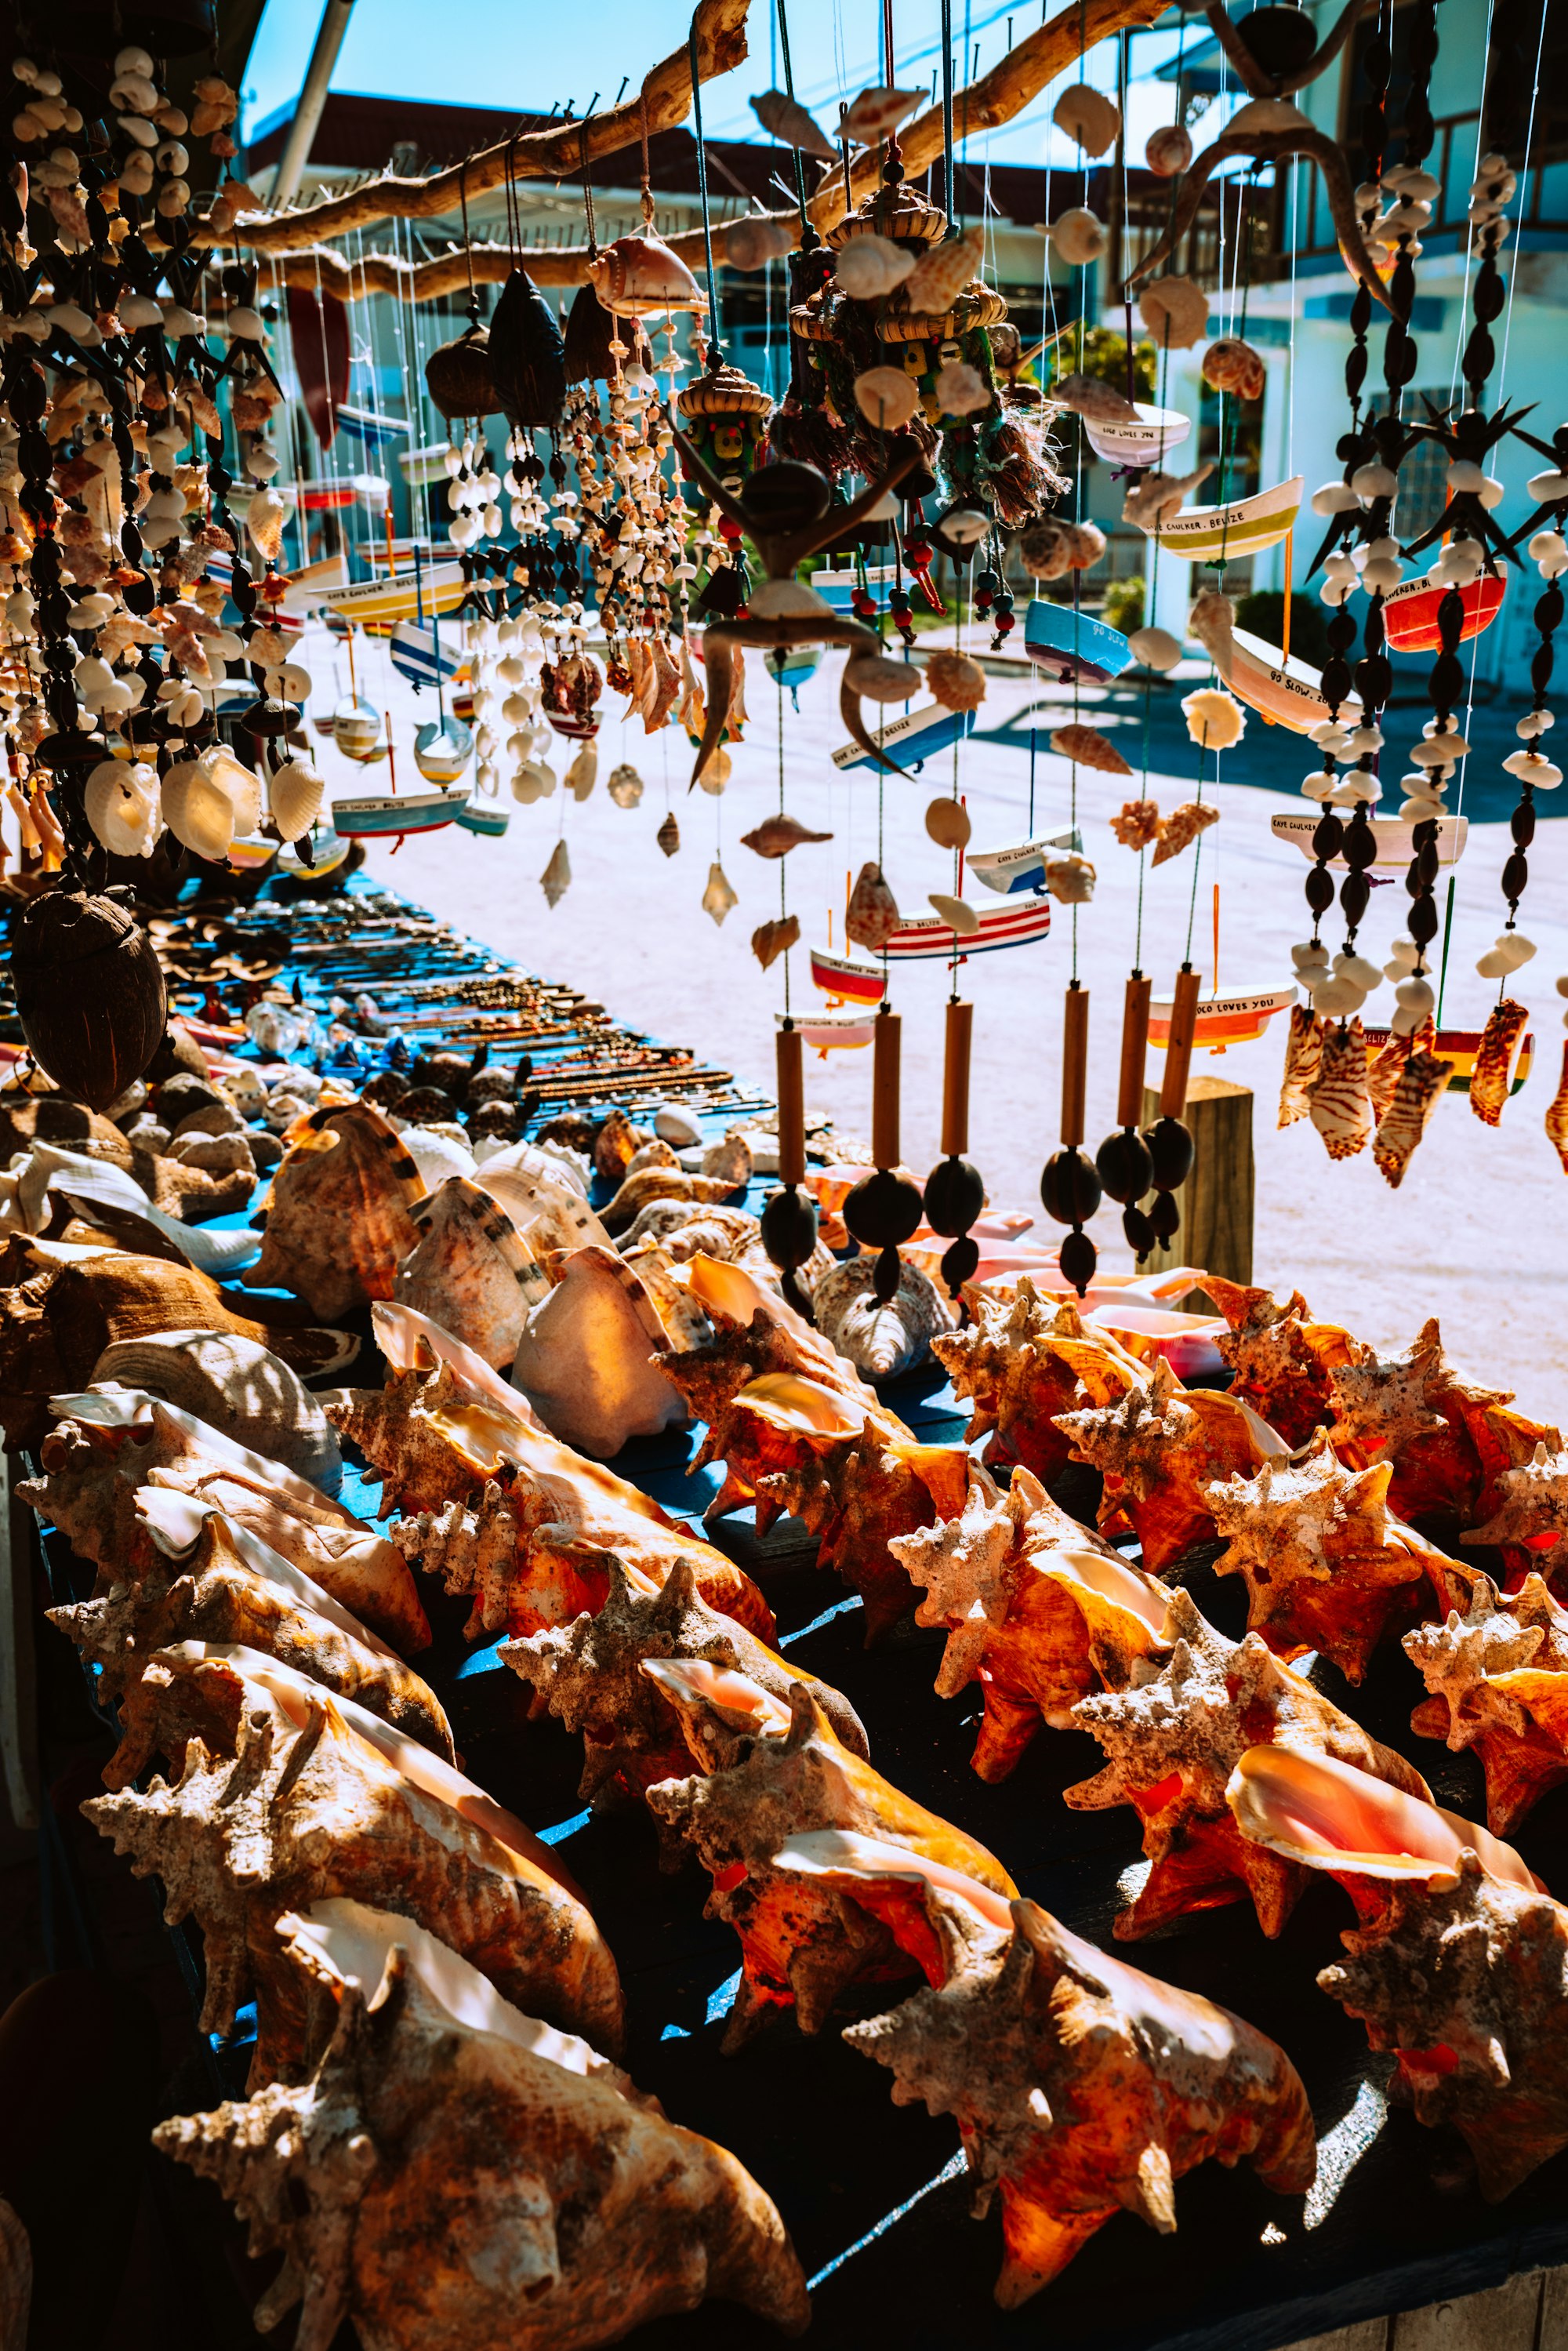 Wind chimes, conch shells, and handmade gifts for sale in a market stall.